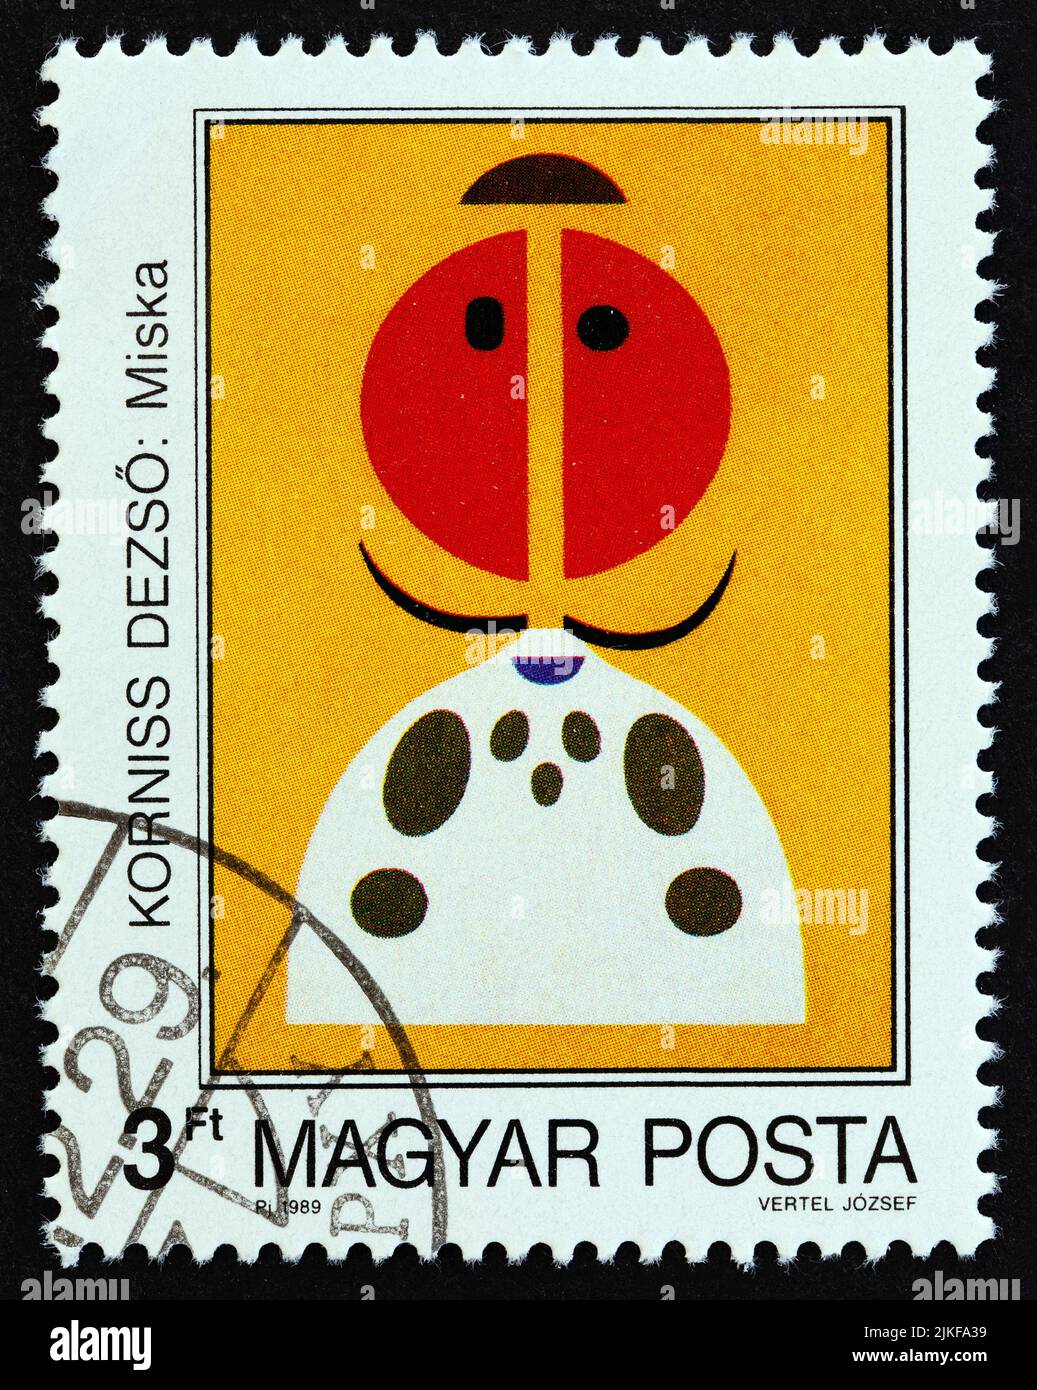 HUNGARY - CIRCA 1989: A stamp printed in Hungary from the 'Modern Paintings' issue shows Miksa by Dezso Korniss, circa 1989. Stock Photo